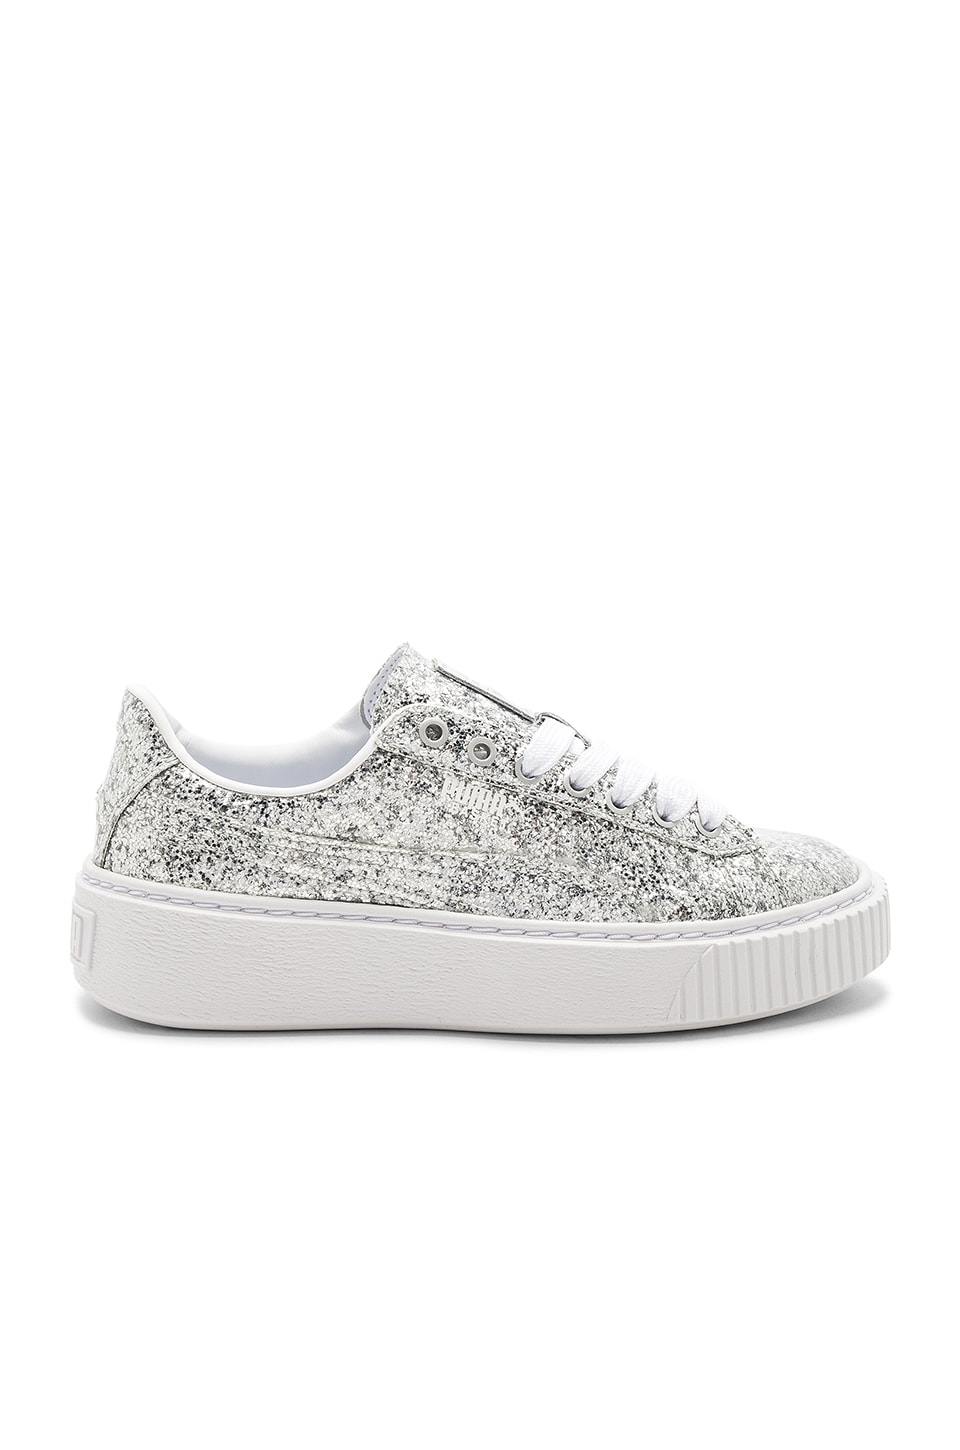 puma basket silver Online Shopping for 